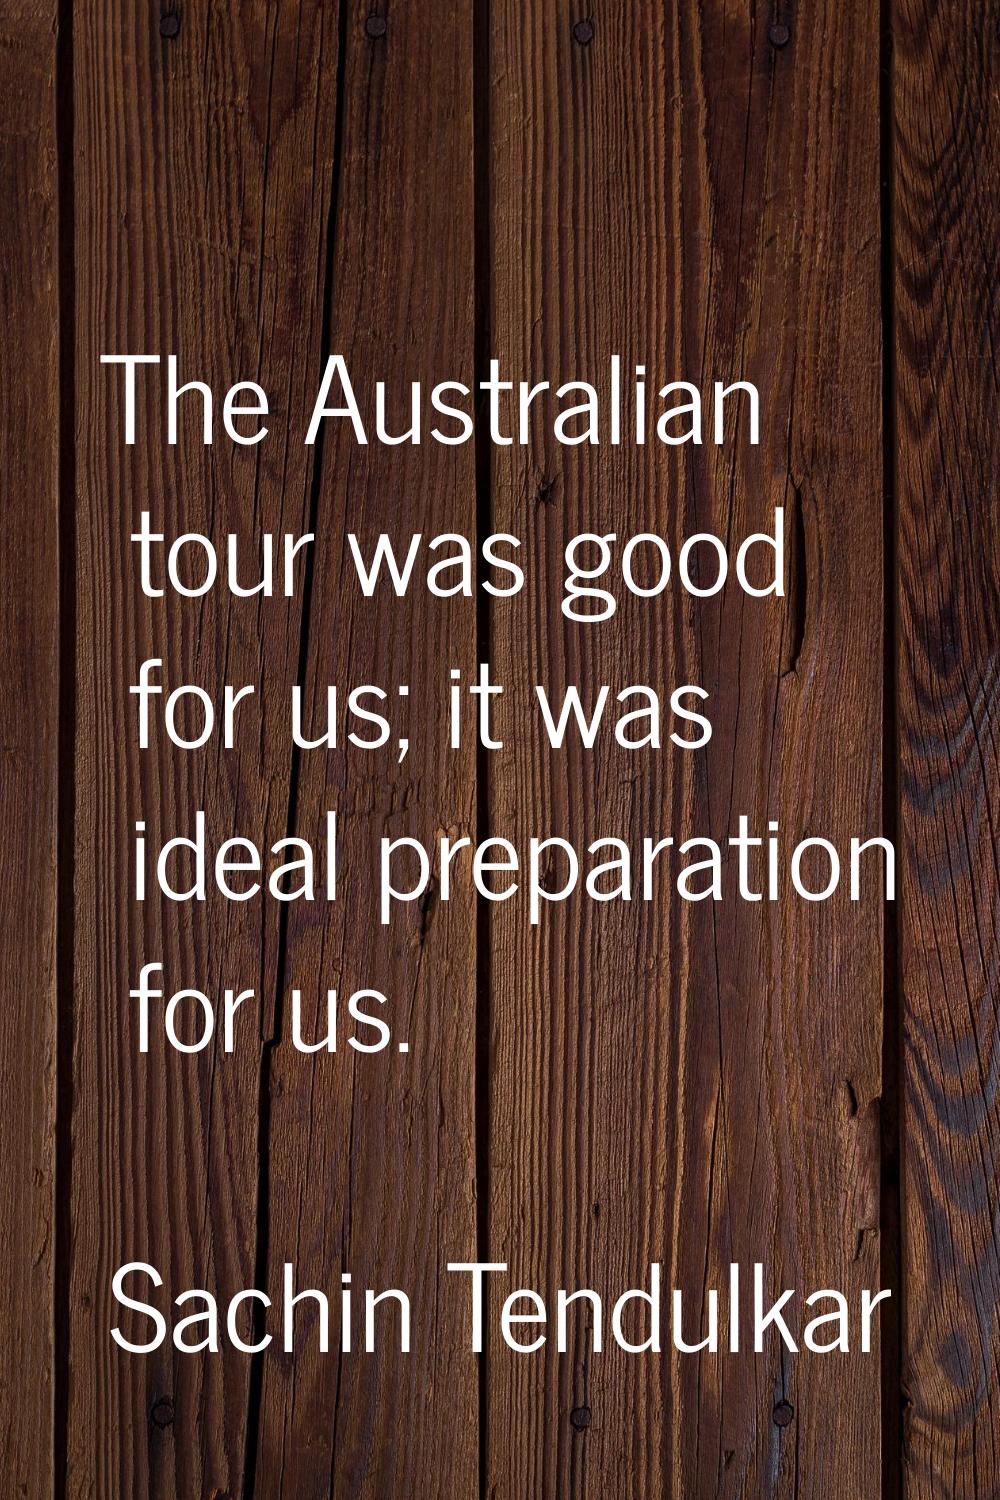 The Australian tour was good for us; it was ideal preparation for us.